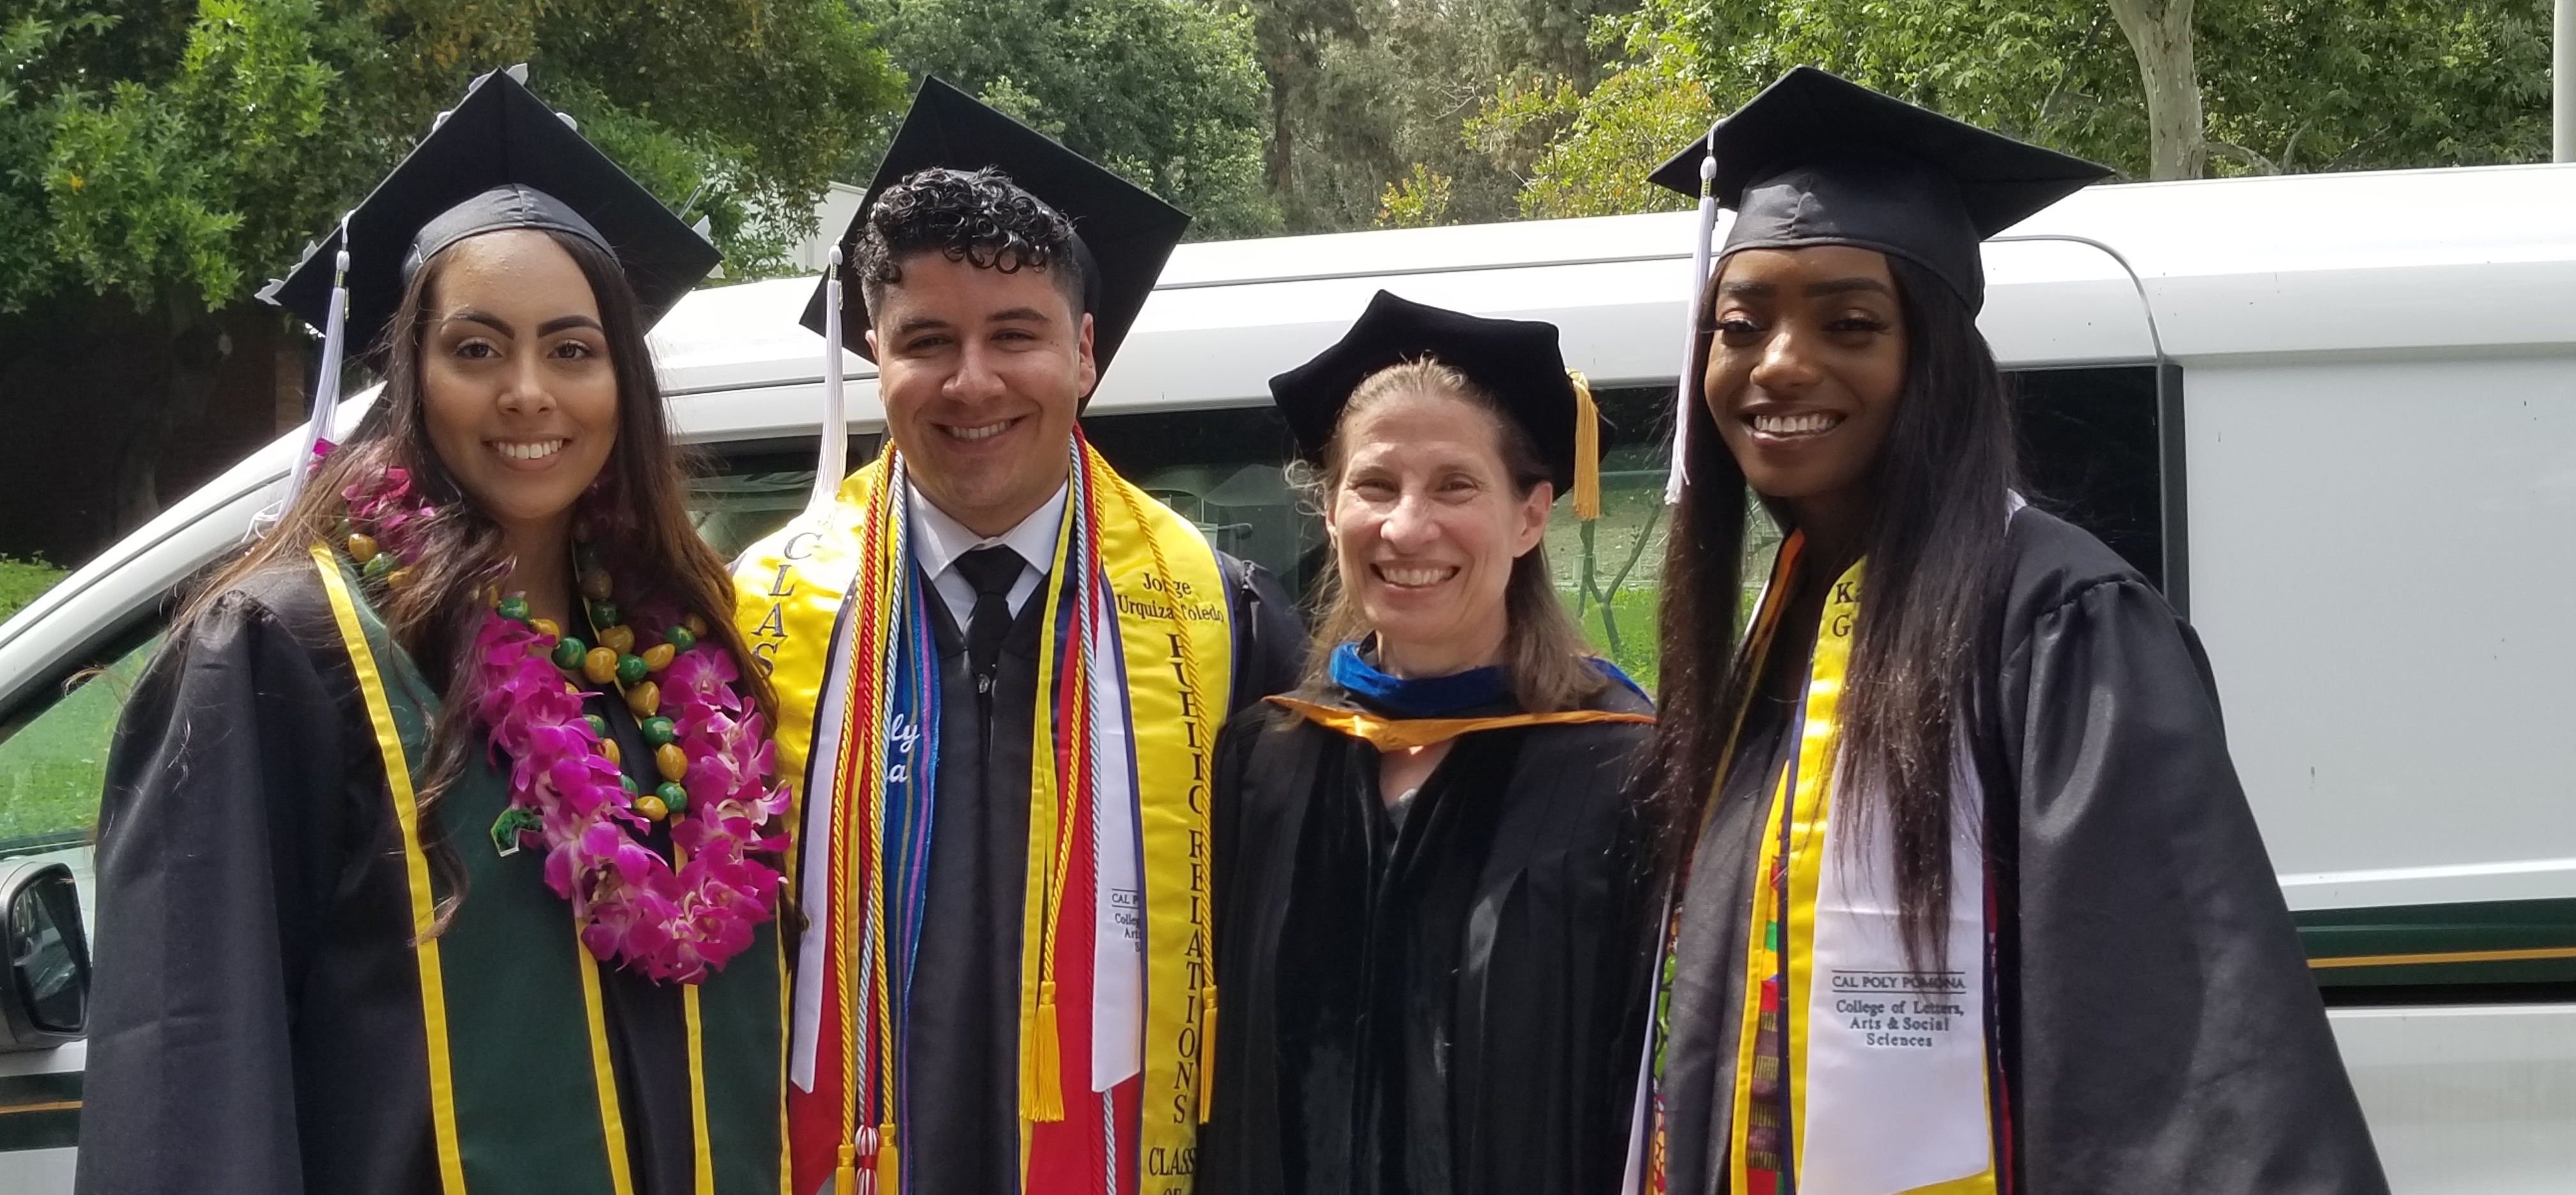 Dr. Amanda Podany and History students at the 2019 Commencement